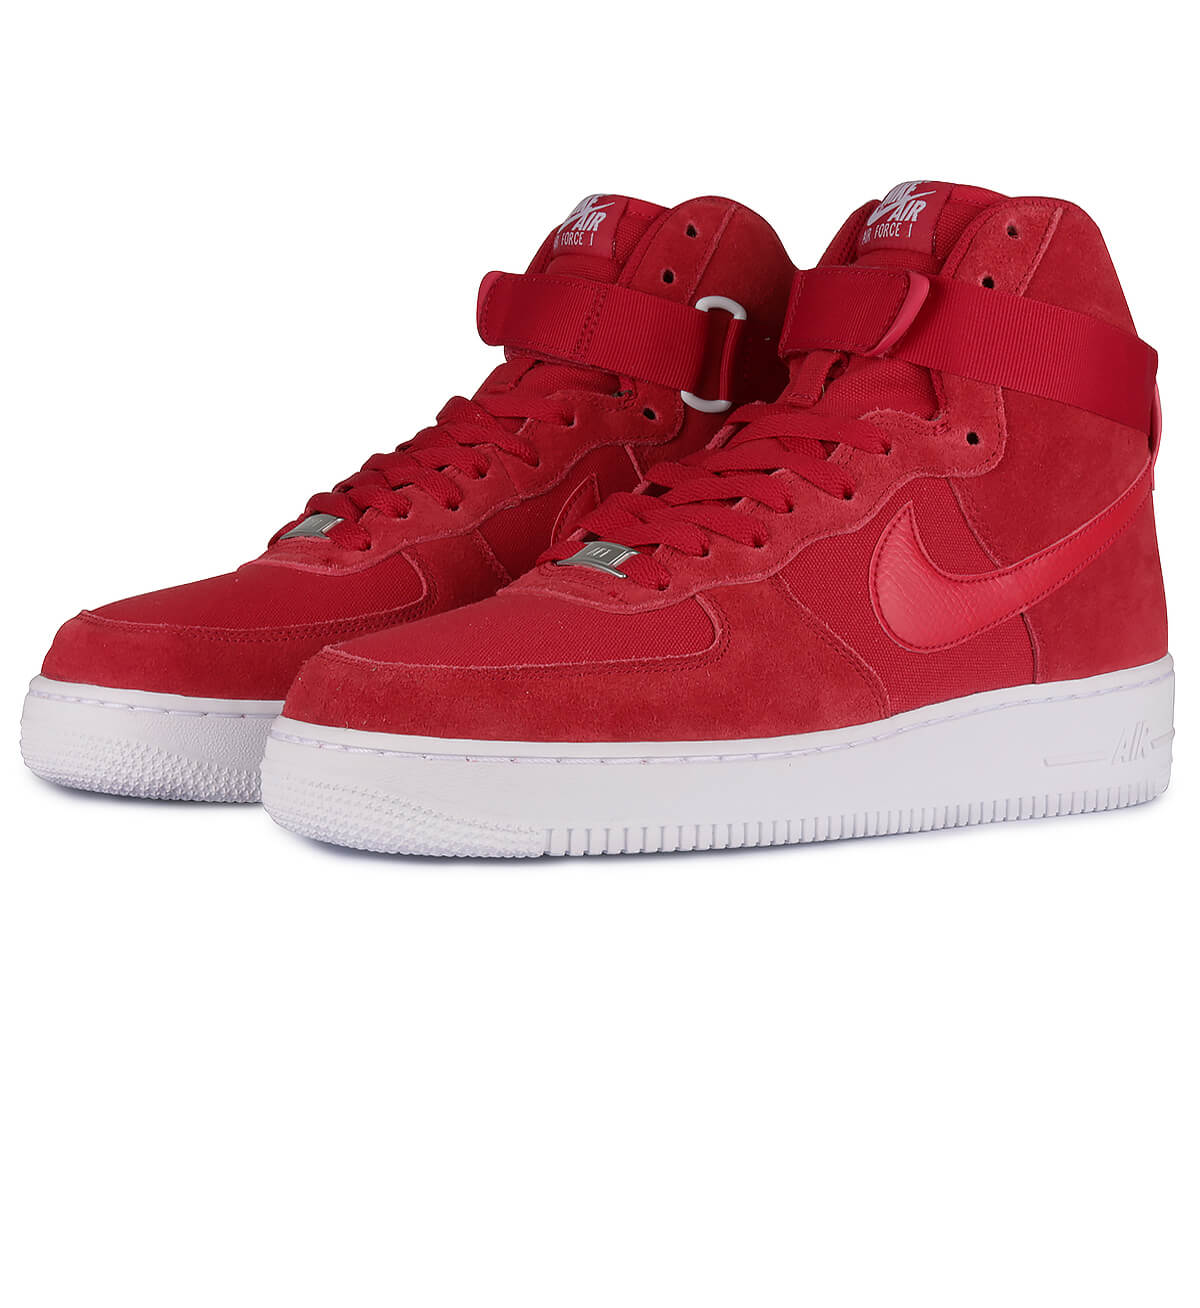 air force 1 high 07 red